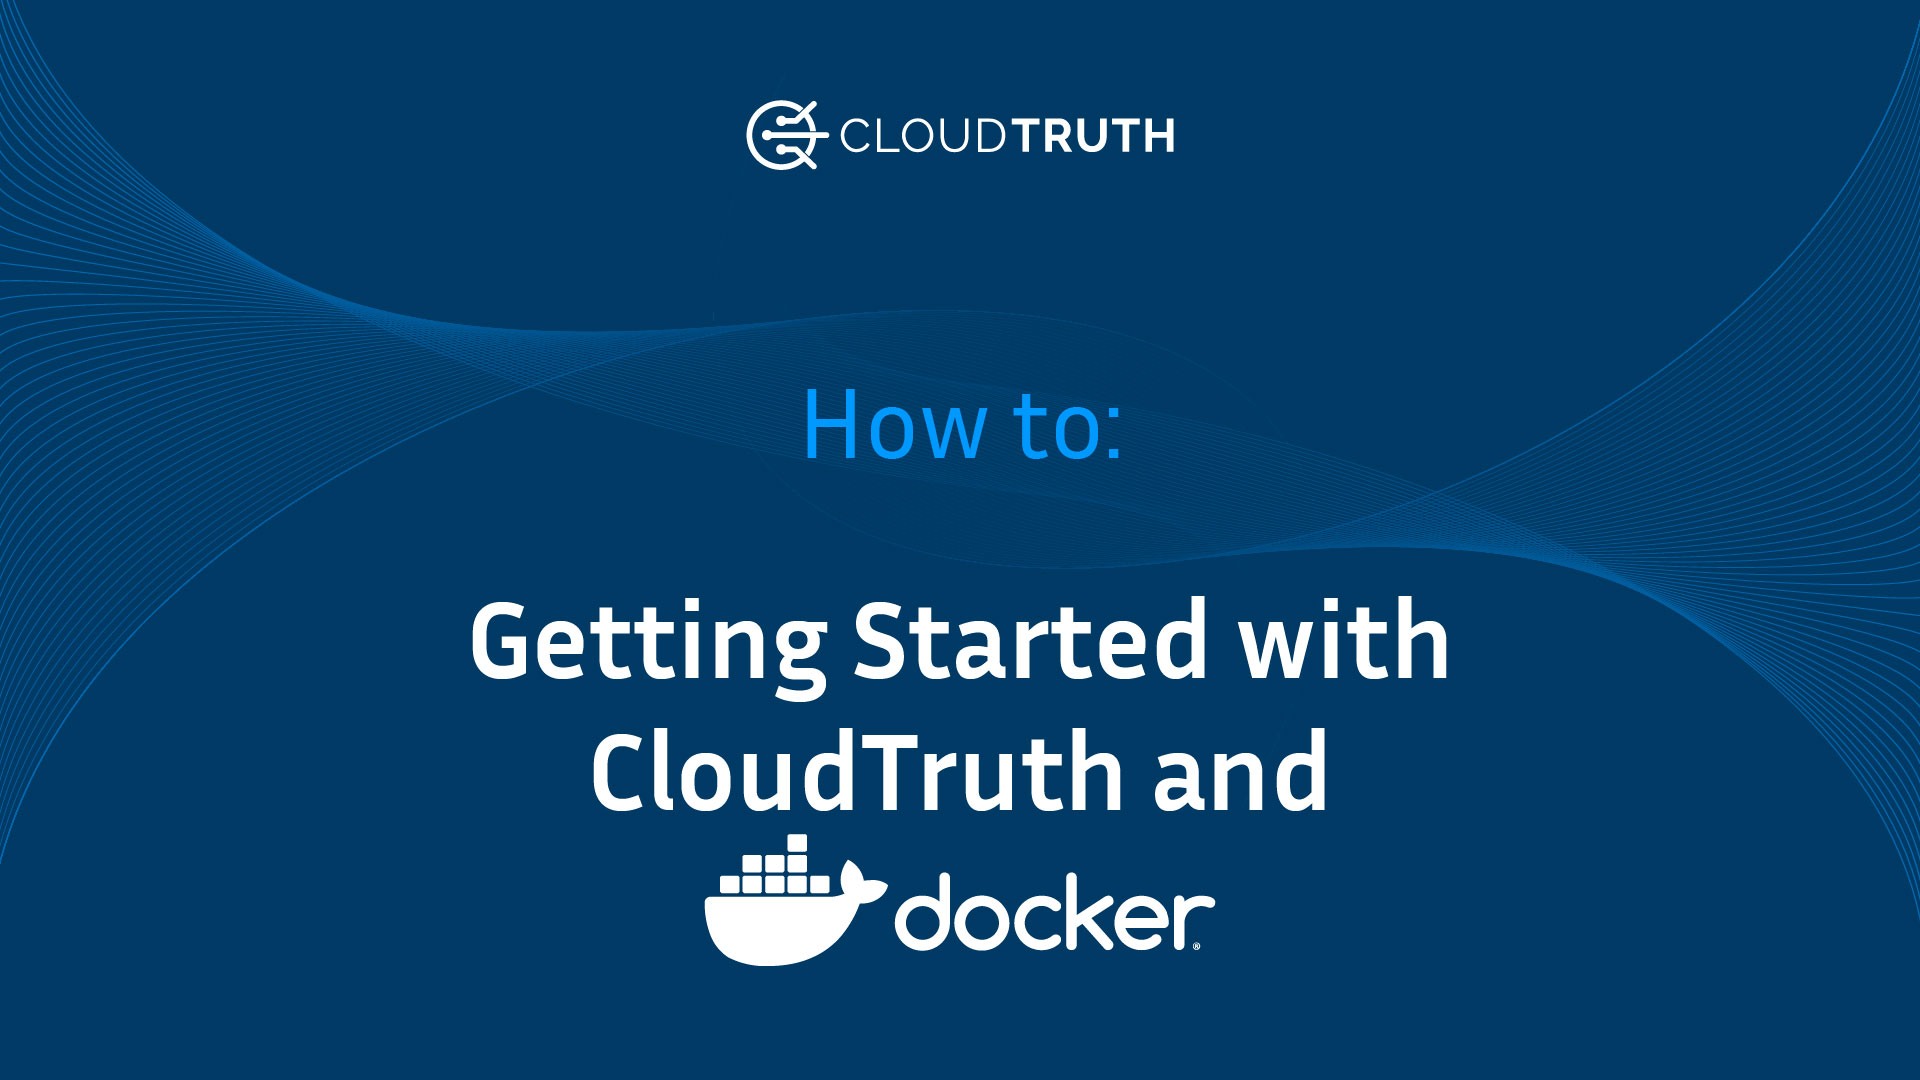 Getting Started with CloudTruth and Docker